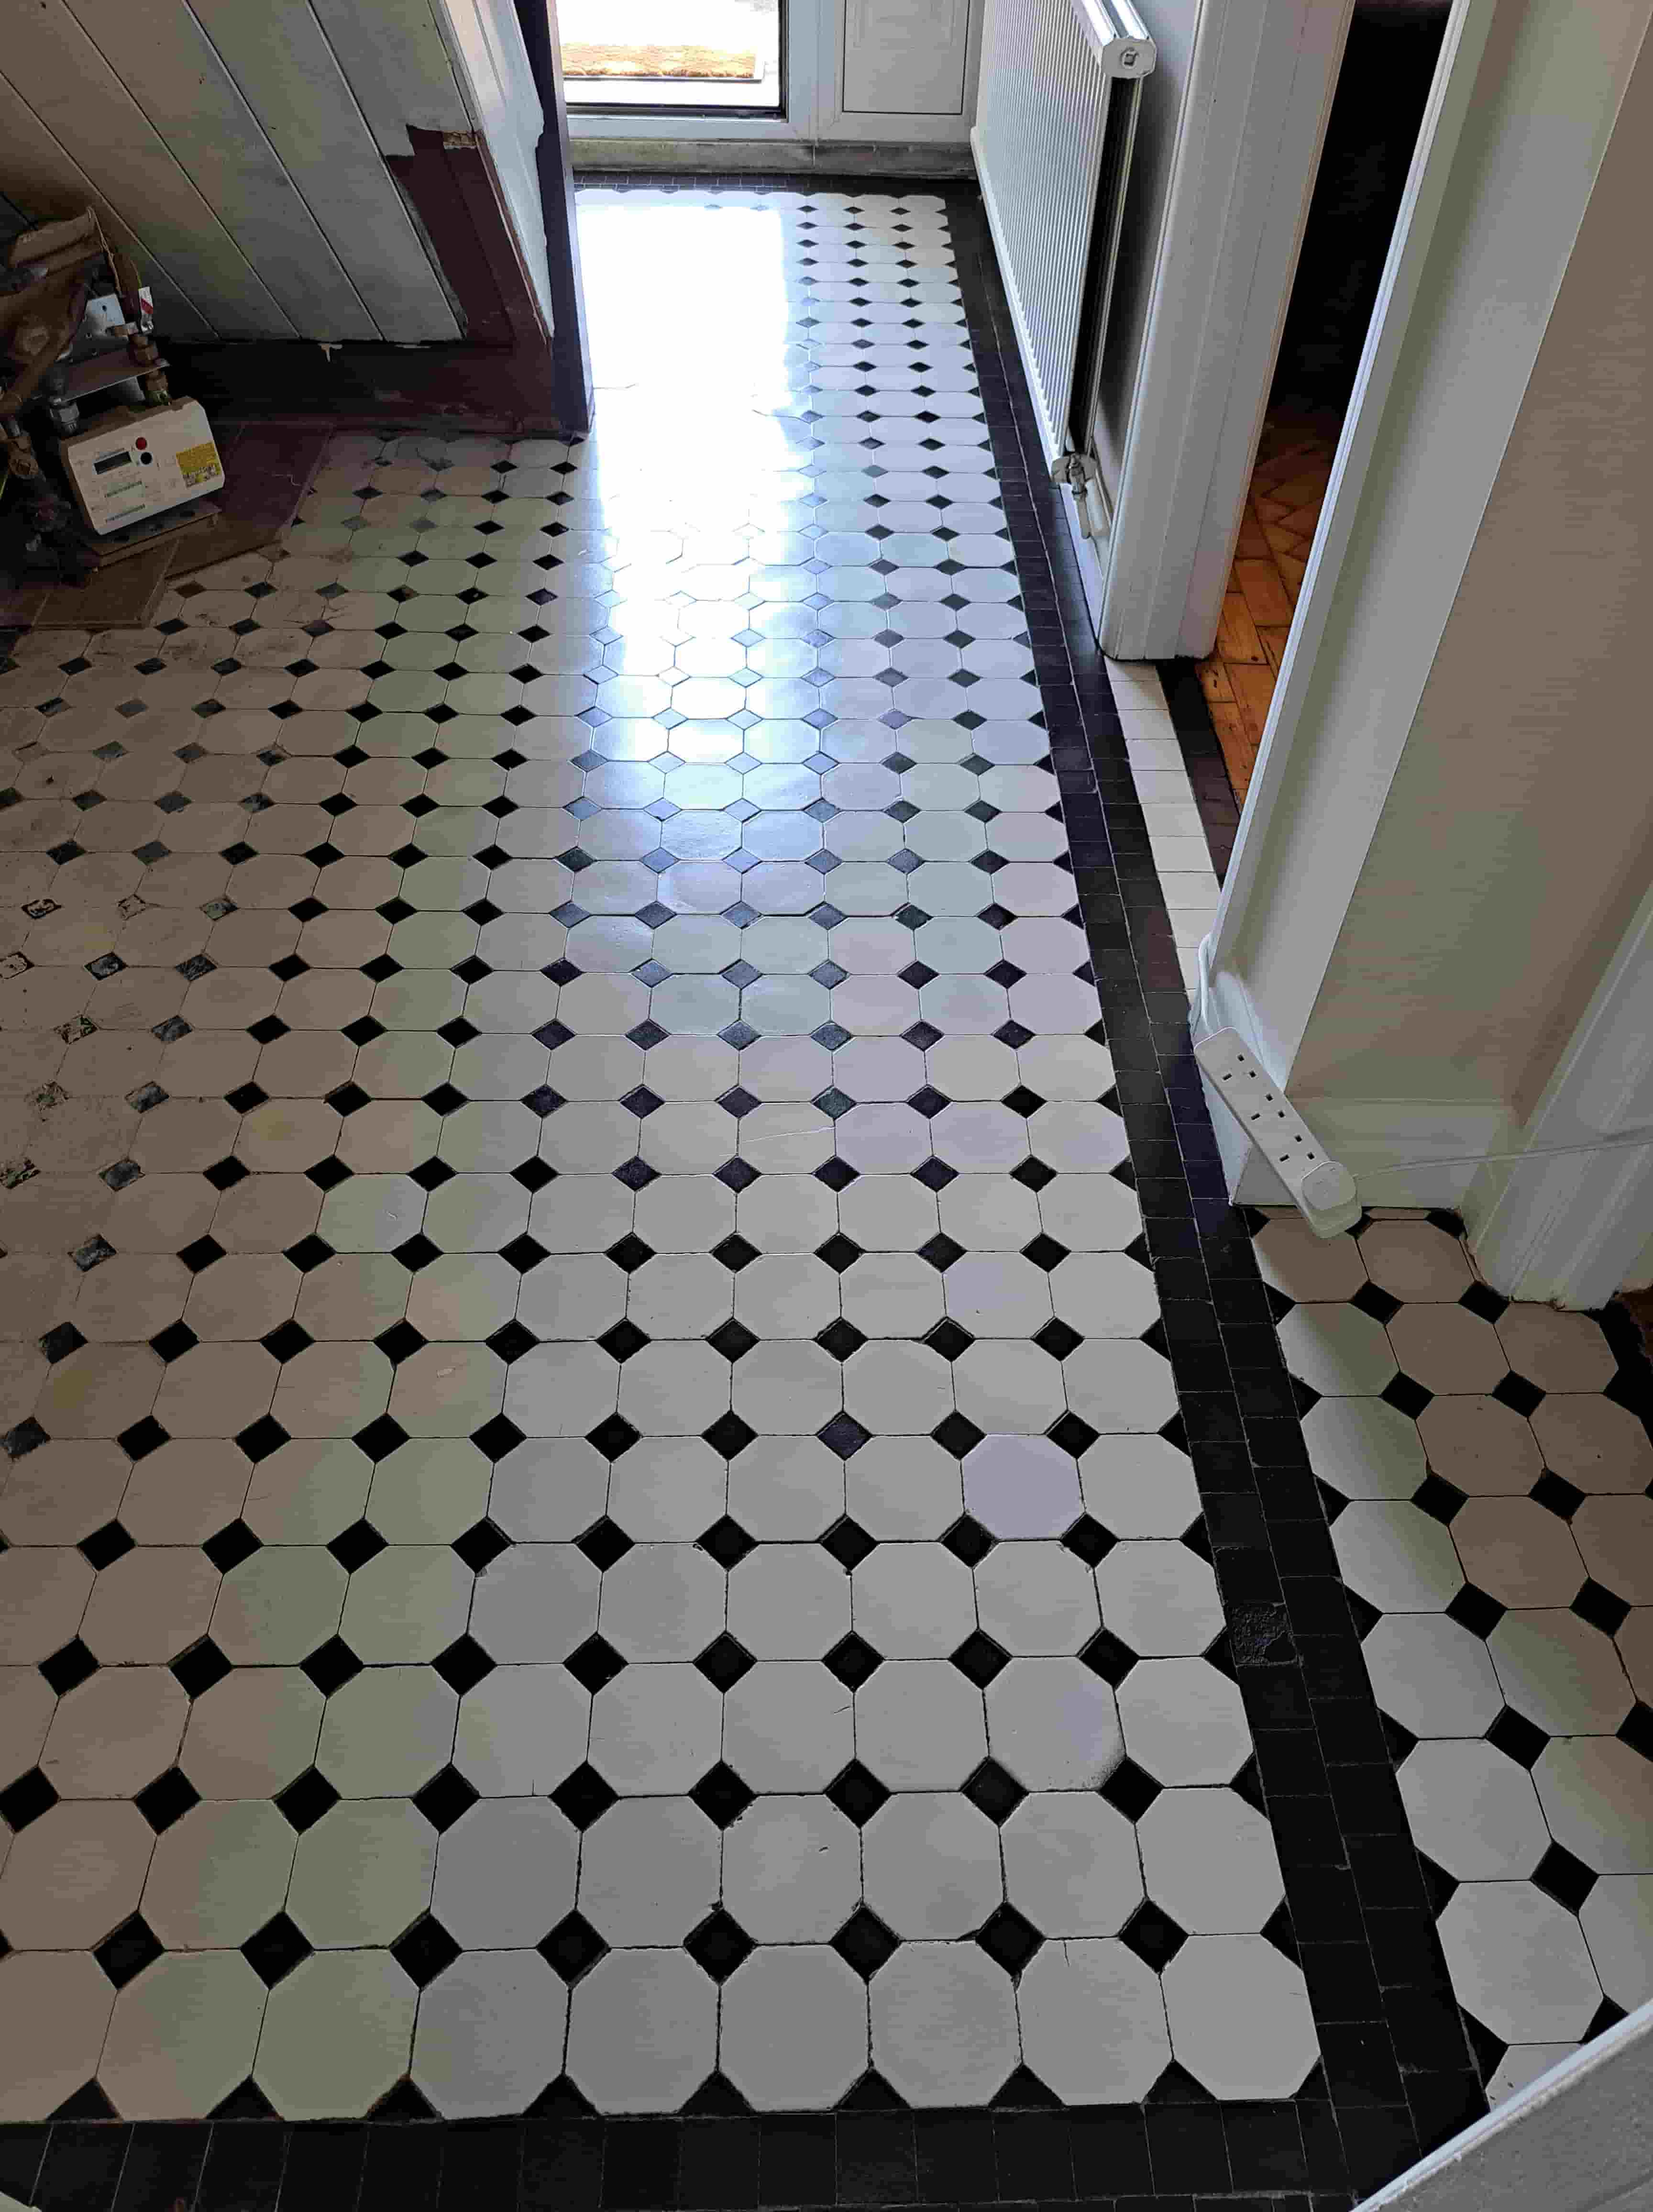 Victorian Tiled Hallway Floor After Cleaning in Penarth